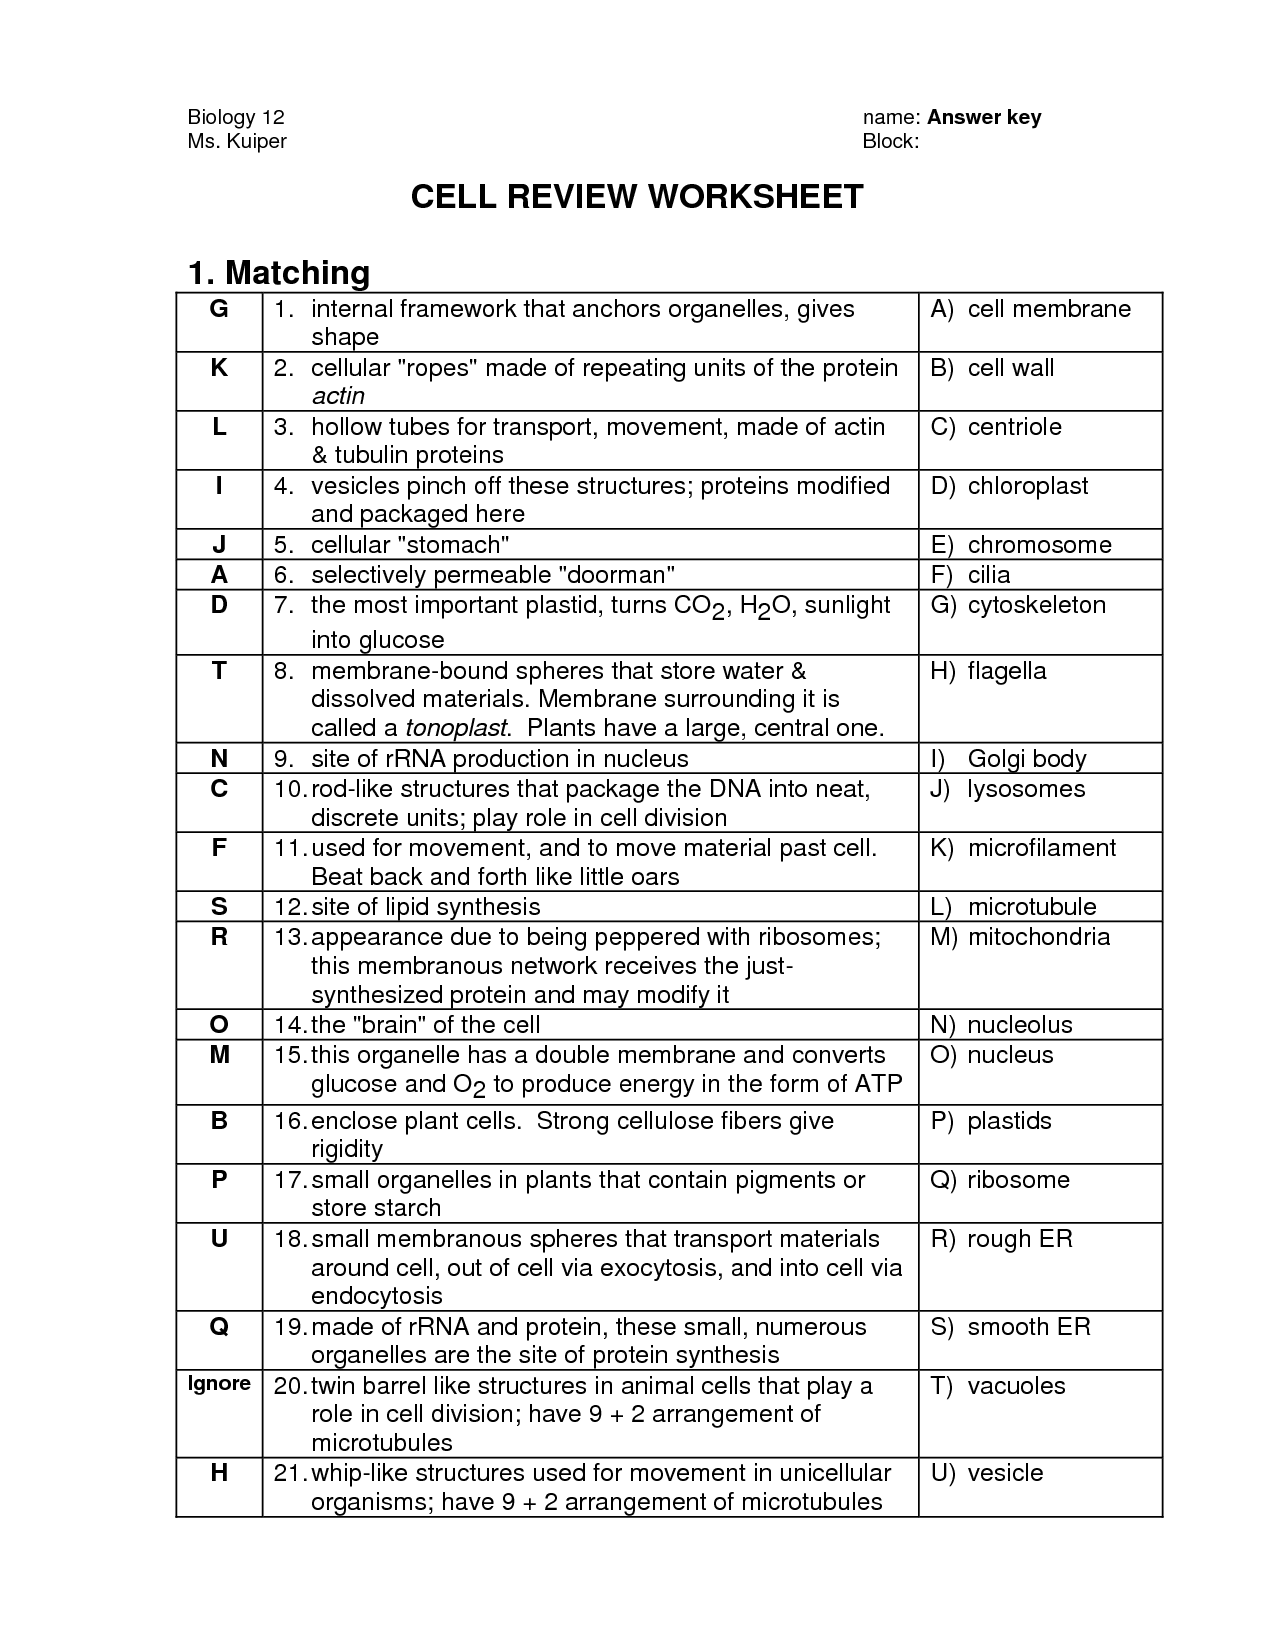 12-best-images-of-cell-membrane-coloring-worksheet-answers-worksheeto